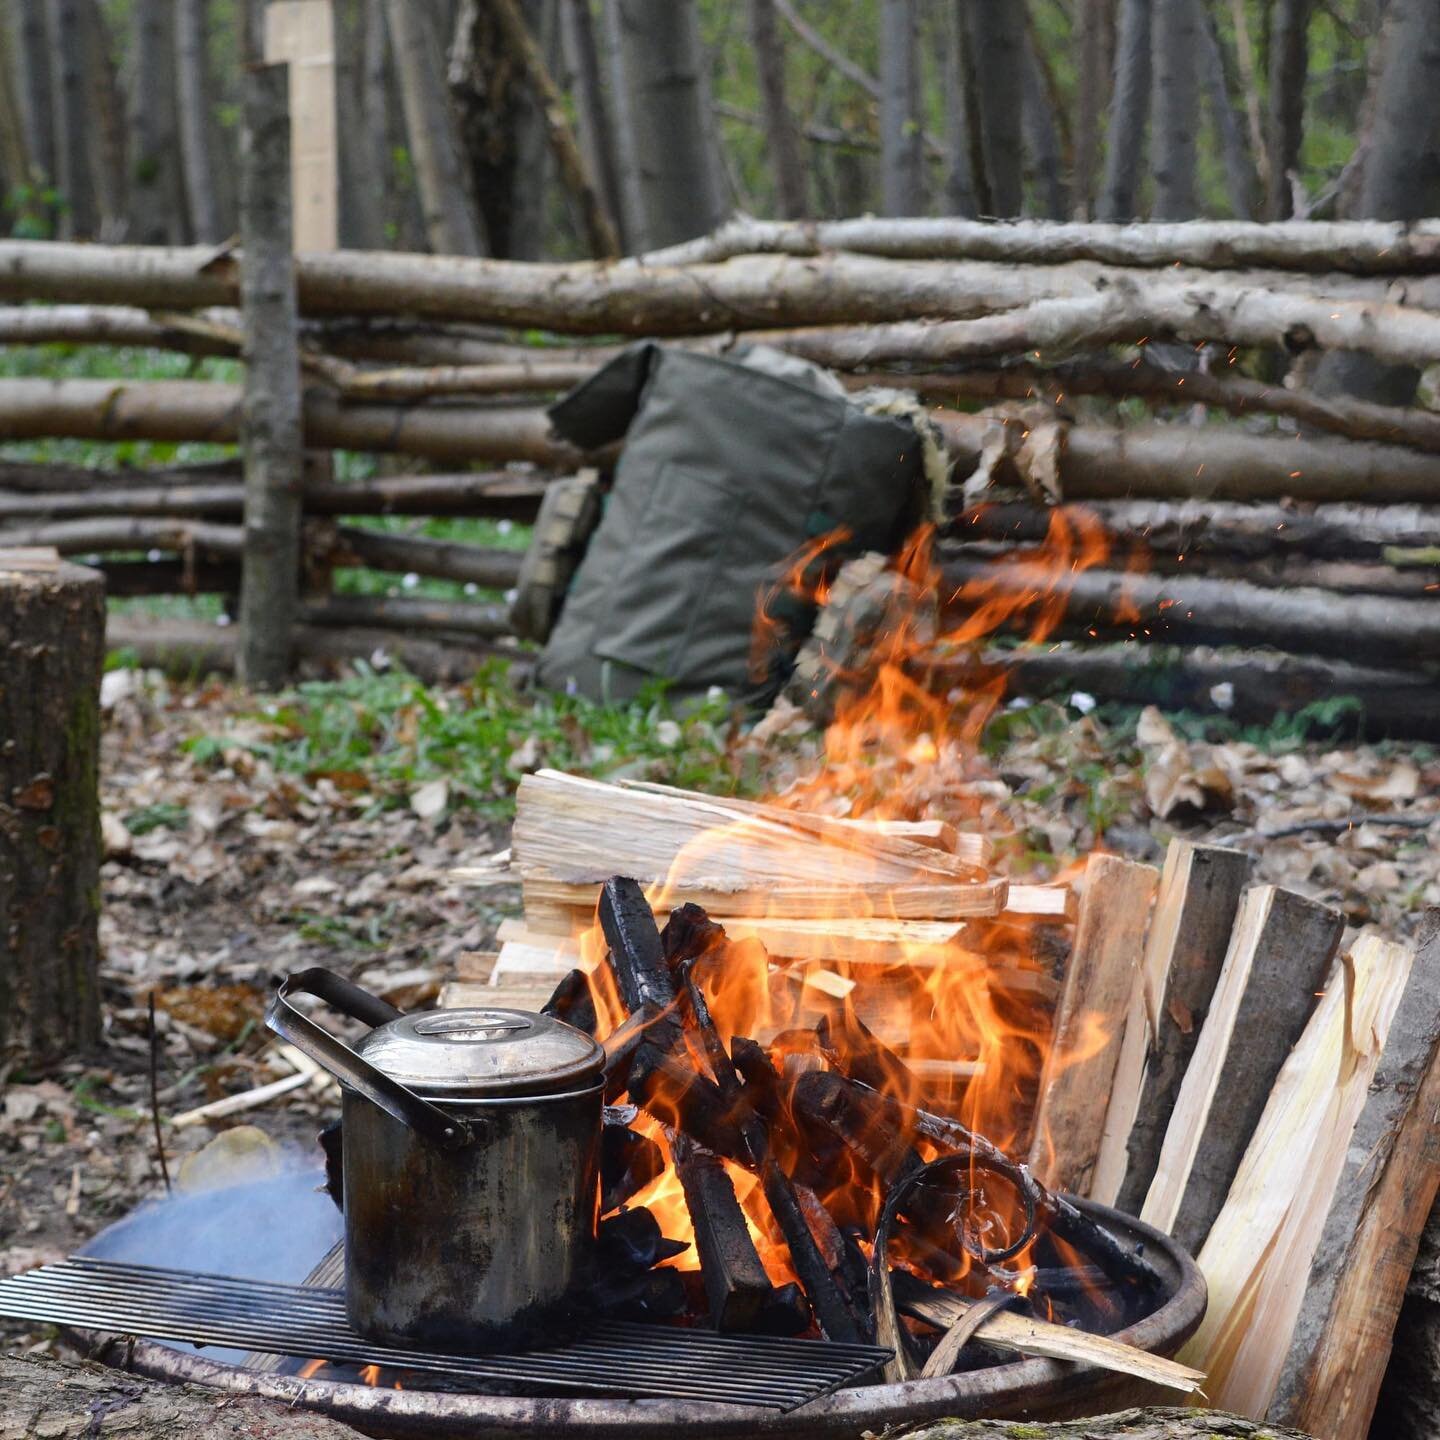 ** NEW ** CAMPFIRE COOKING WORKSHOPS

How does lighting, maintaining and cooking over an open fire sound to you? This day in the woods is a fun, practical, hands on workshop with @backgardenbushcraft, intended for those wanting to learn the basics of